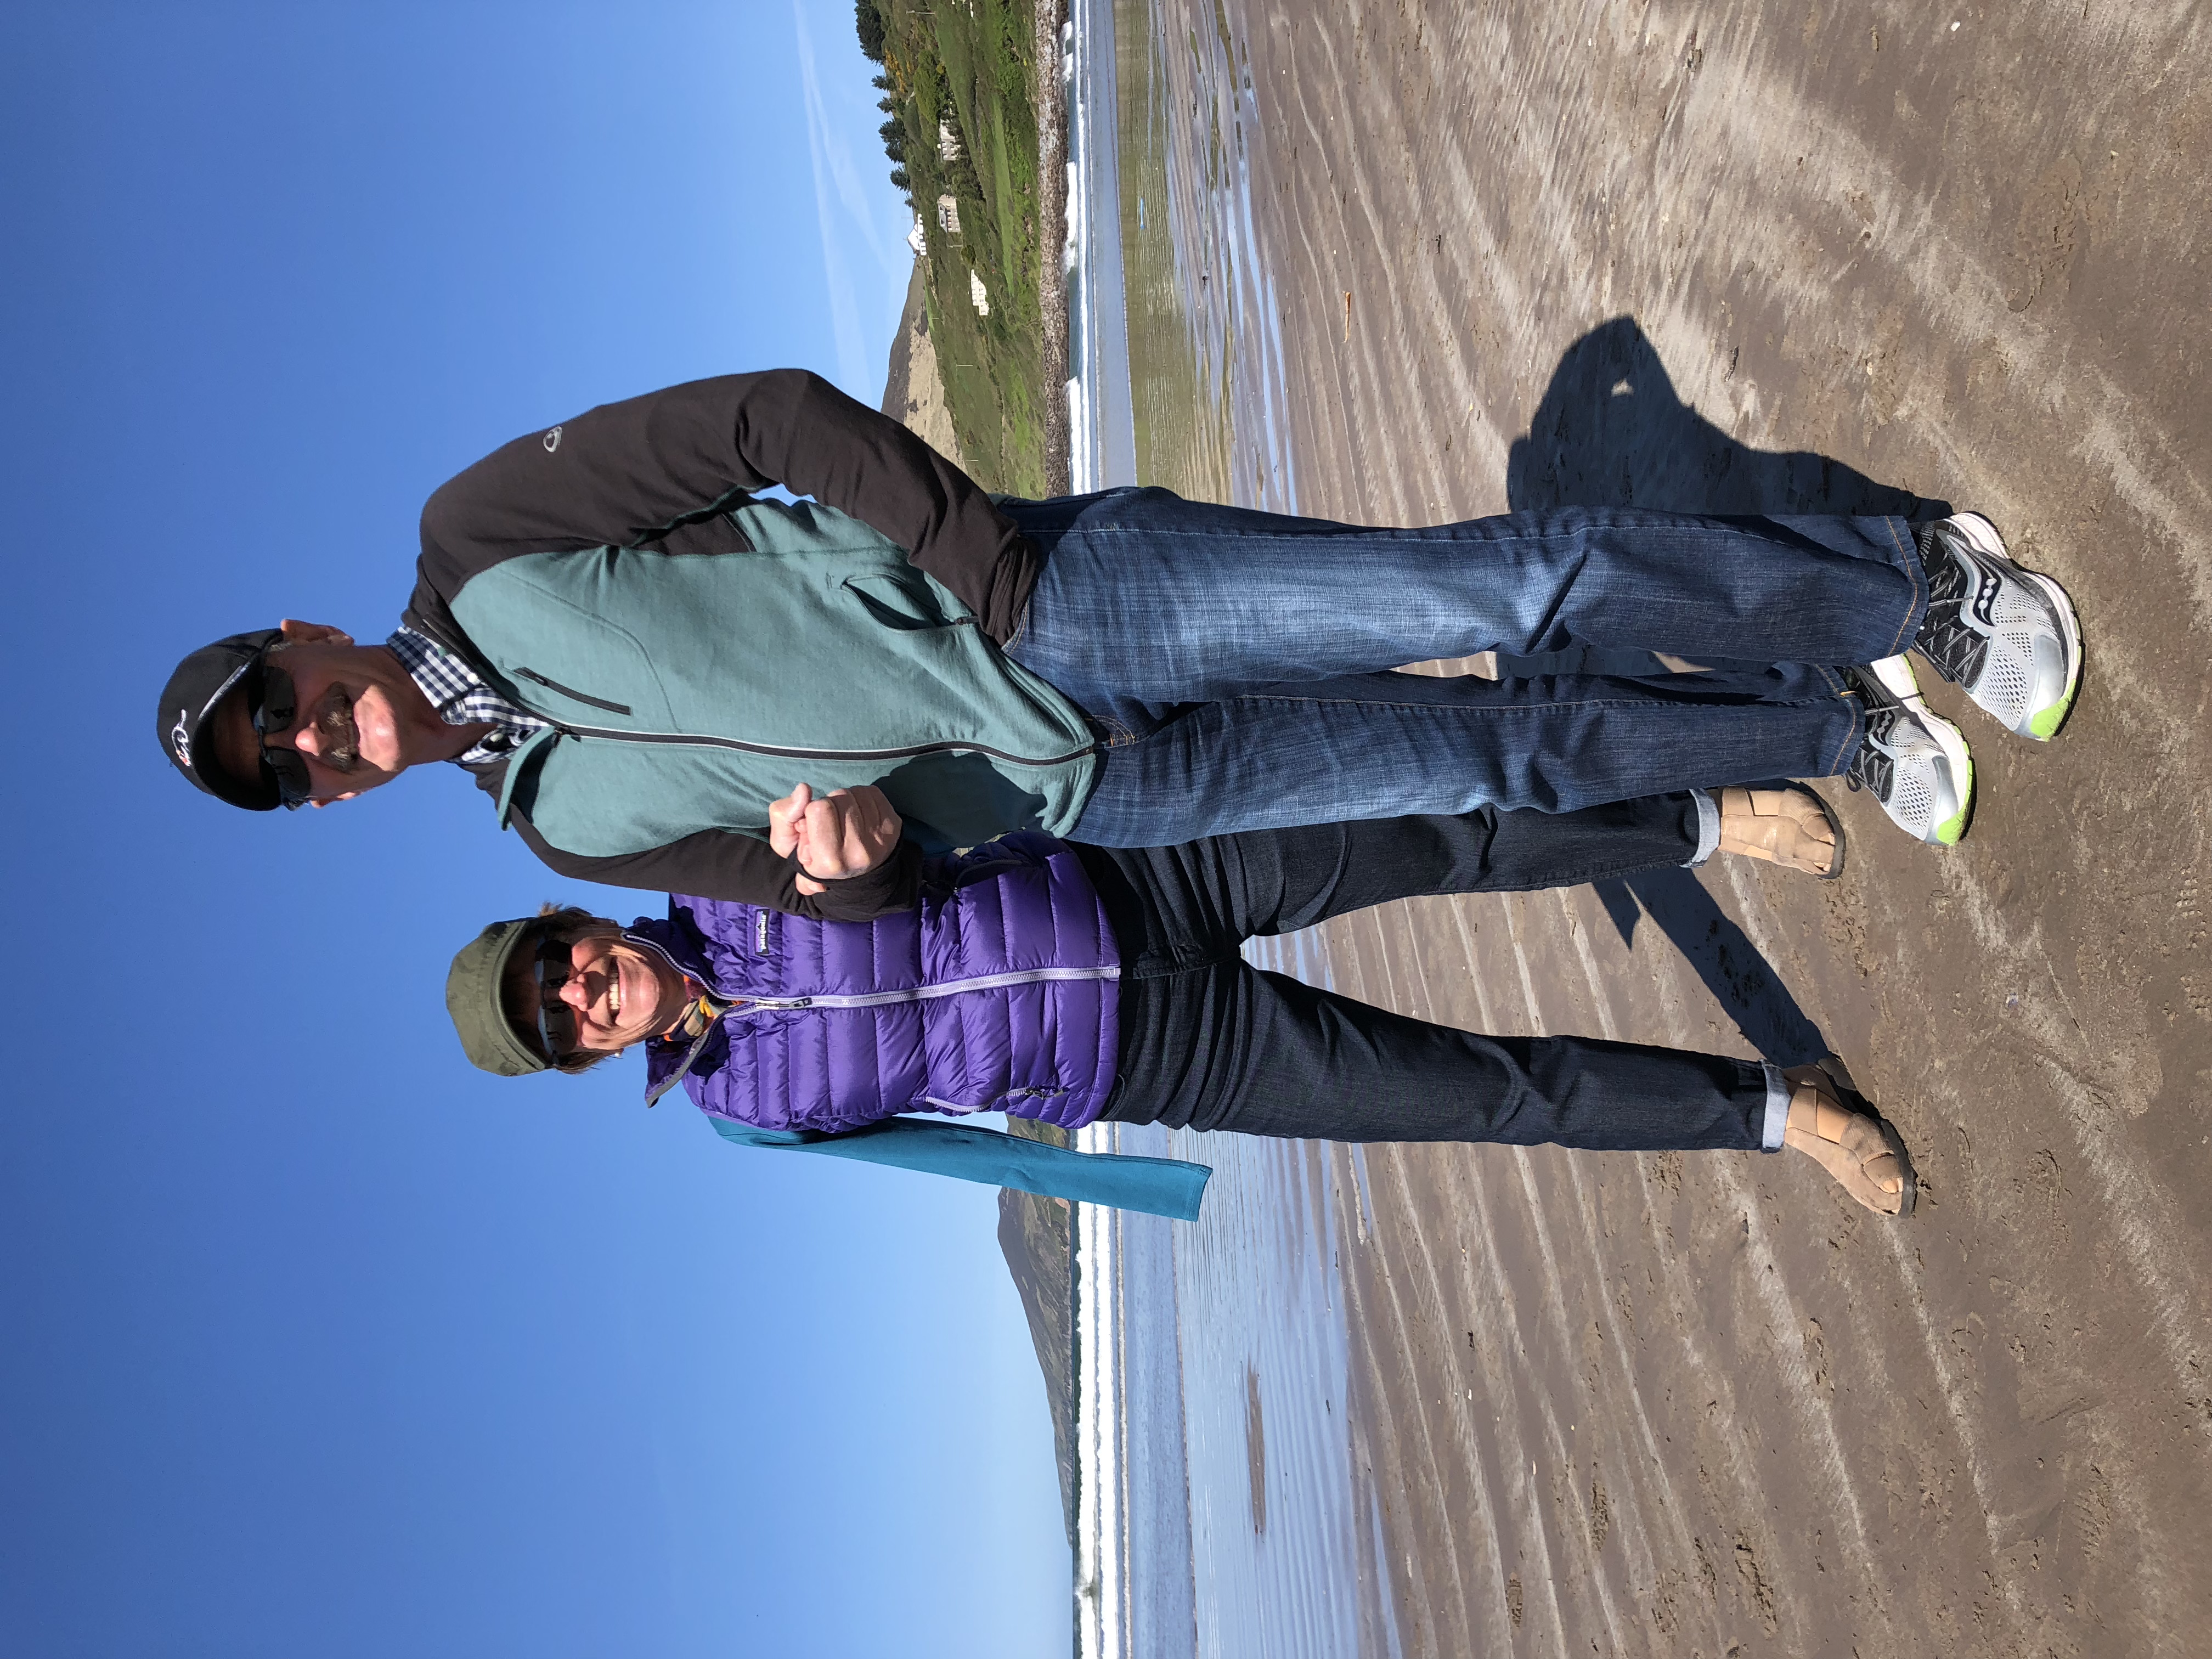 Caucasian couple standing on a sunny beach, wearing jeans and jackets